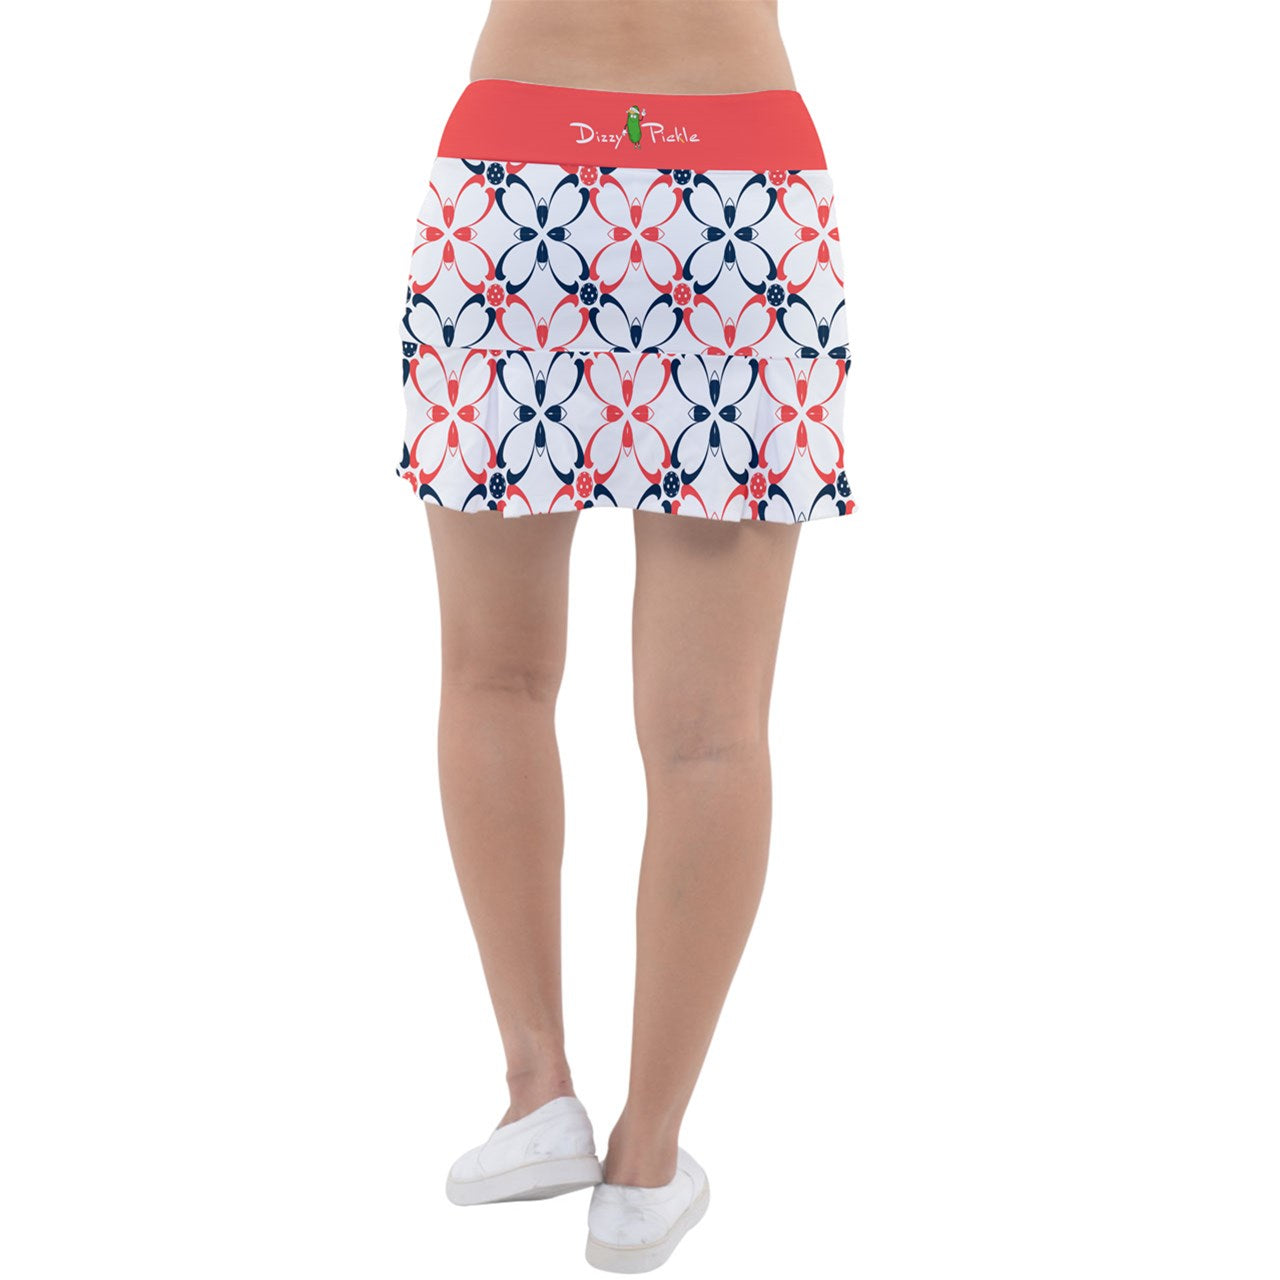 Dizzy Pickle Van Petals Classic Women's Pickleball Pleated Skort with Inner Shorts and Pockets White